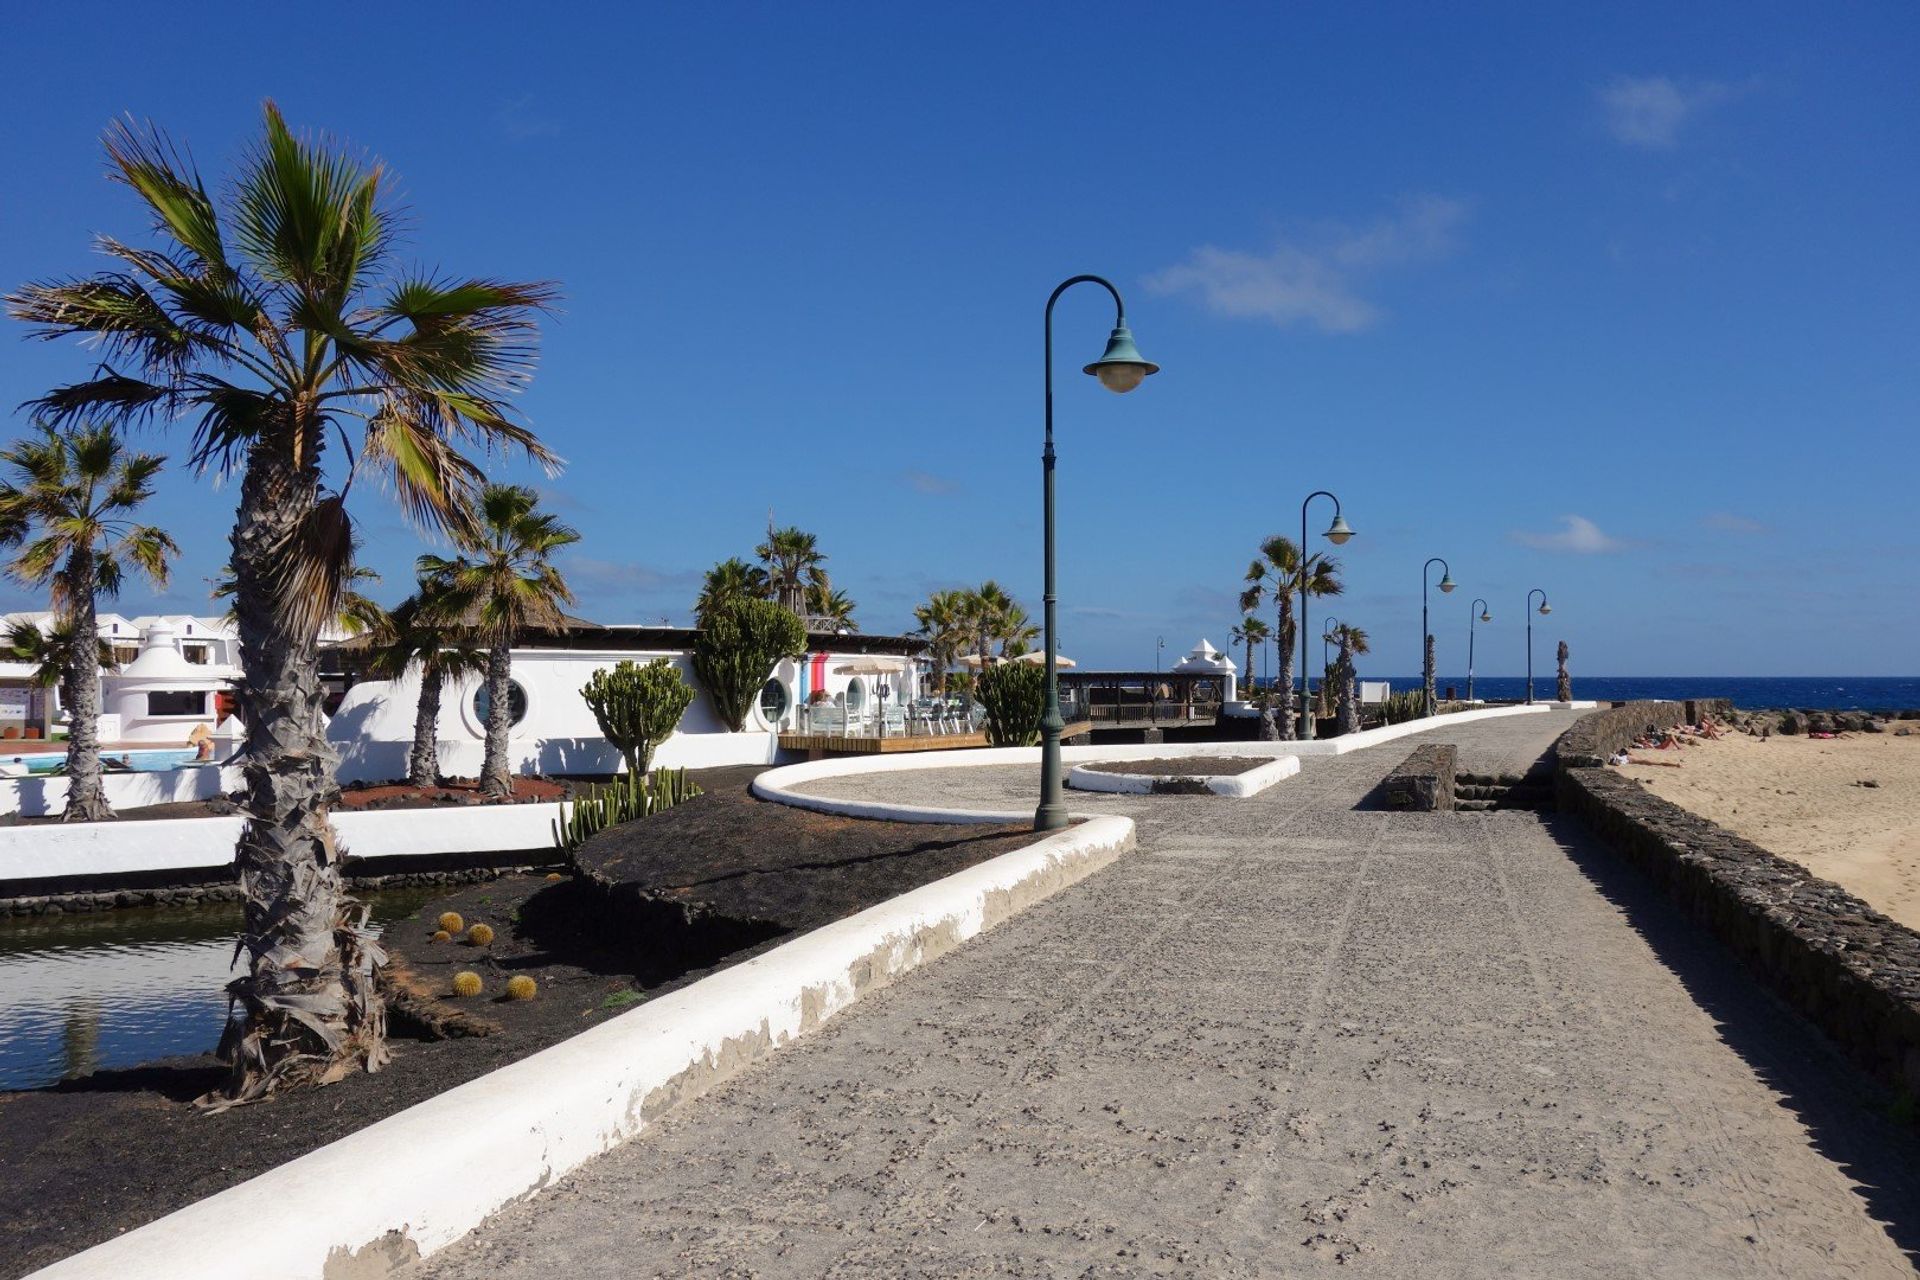 Take an evening stroll down the beach promenade after a delicious meal of local seafood